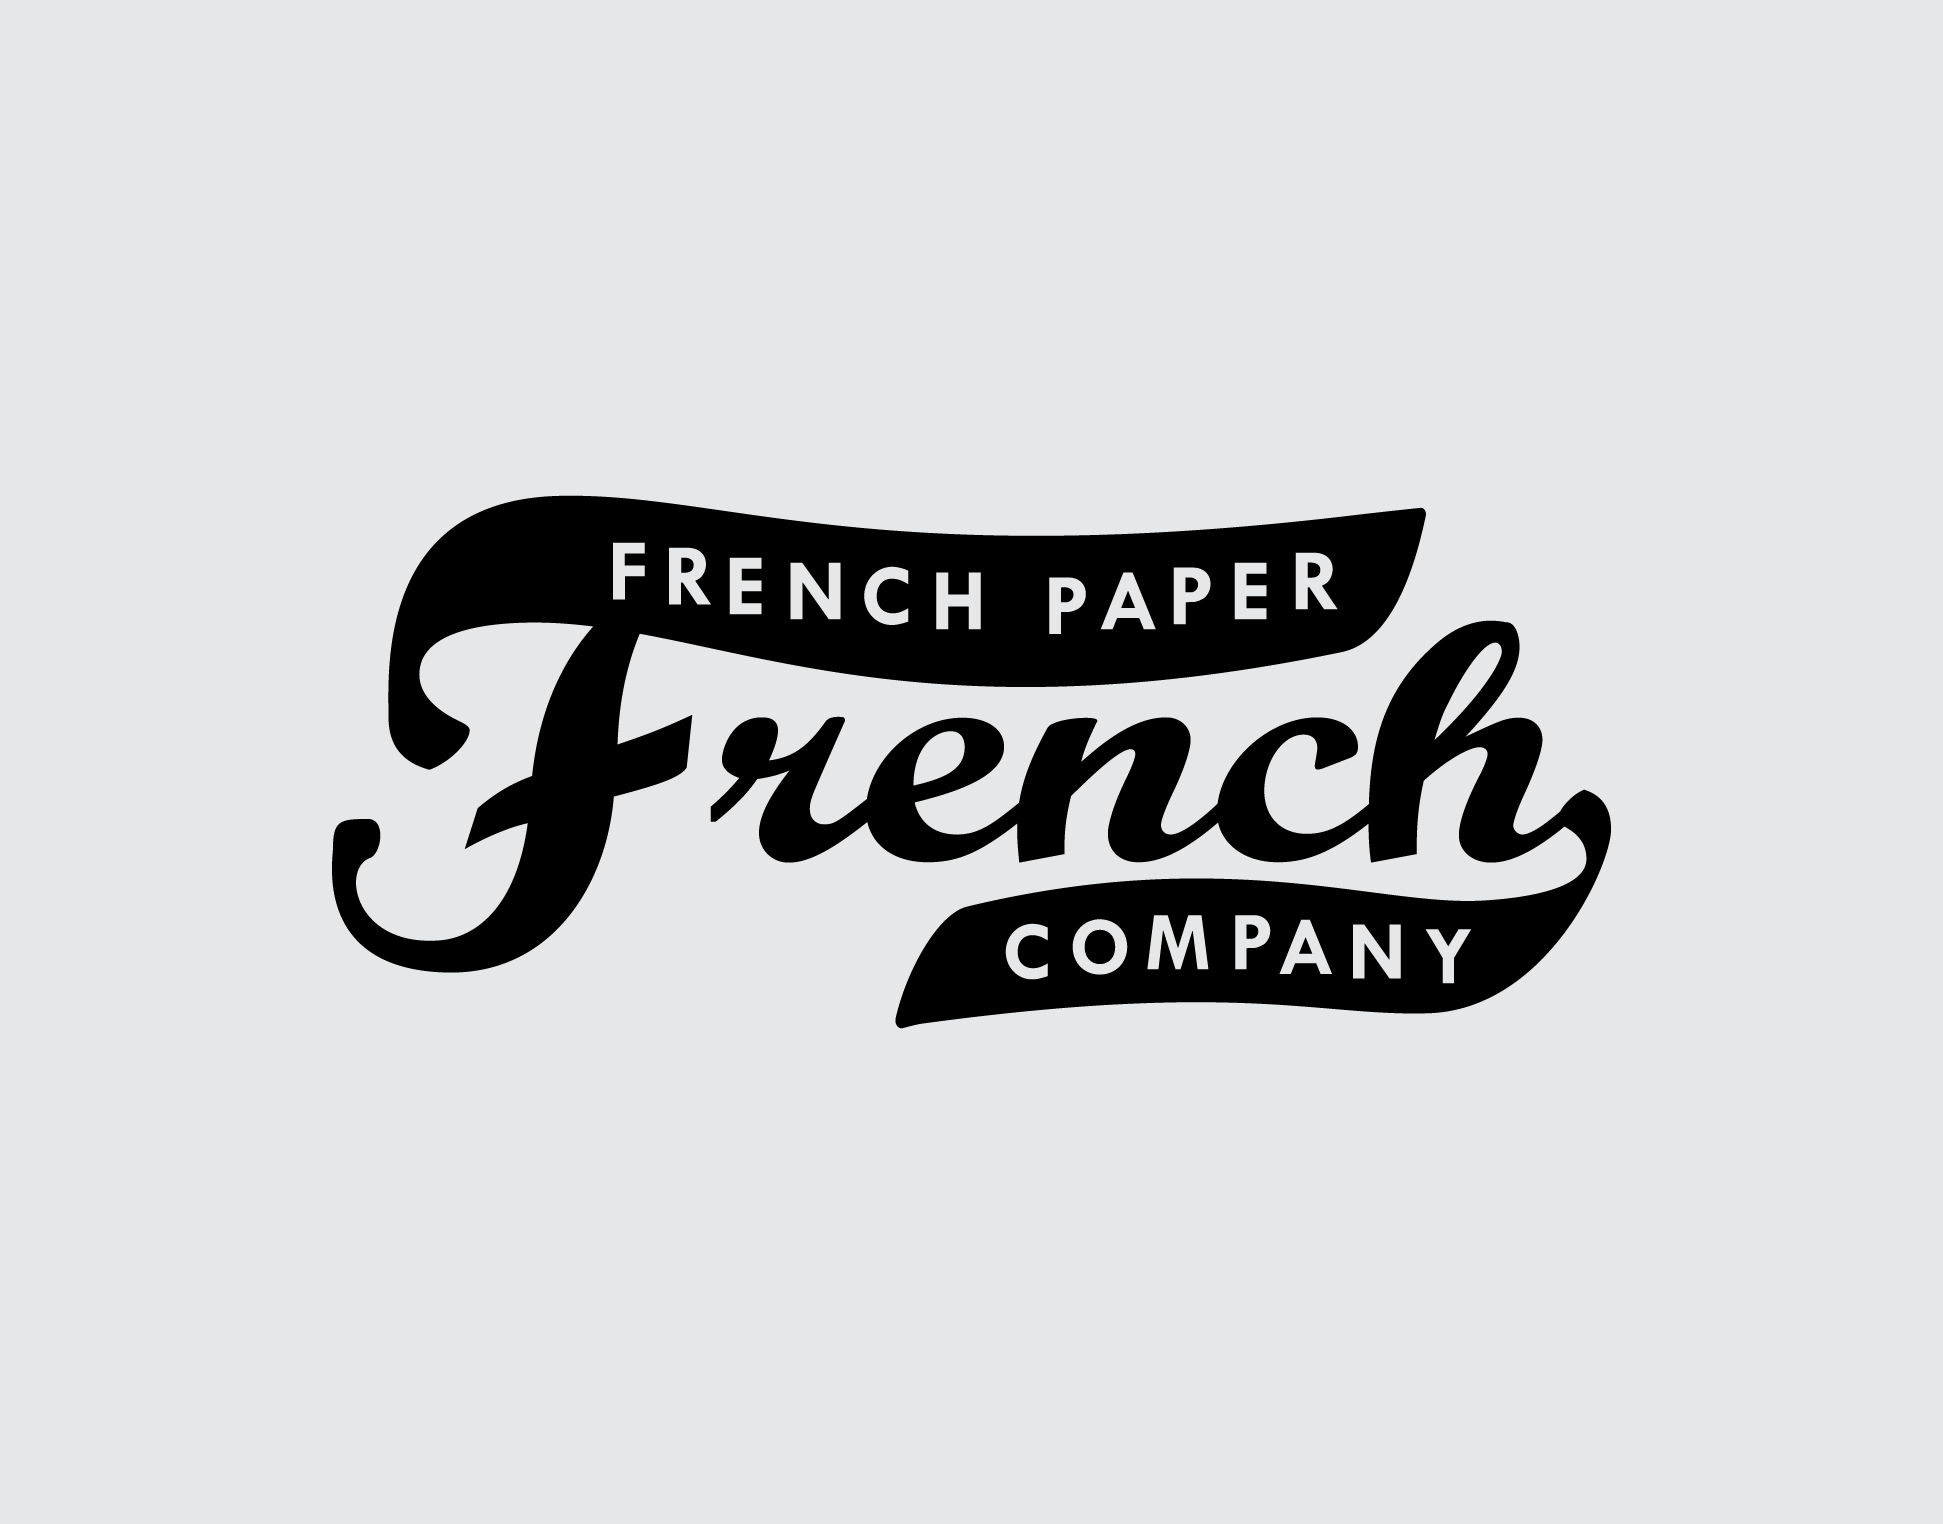 Paper Company Logo - About French Paper - Logos